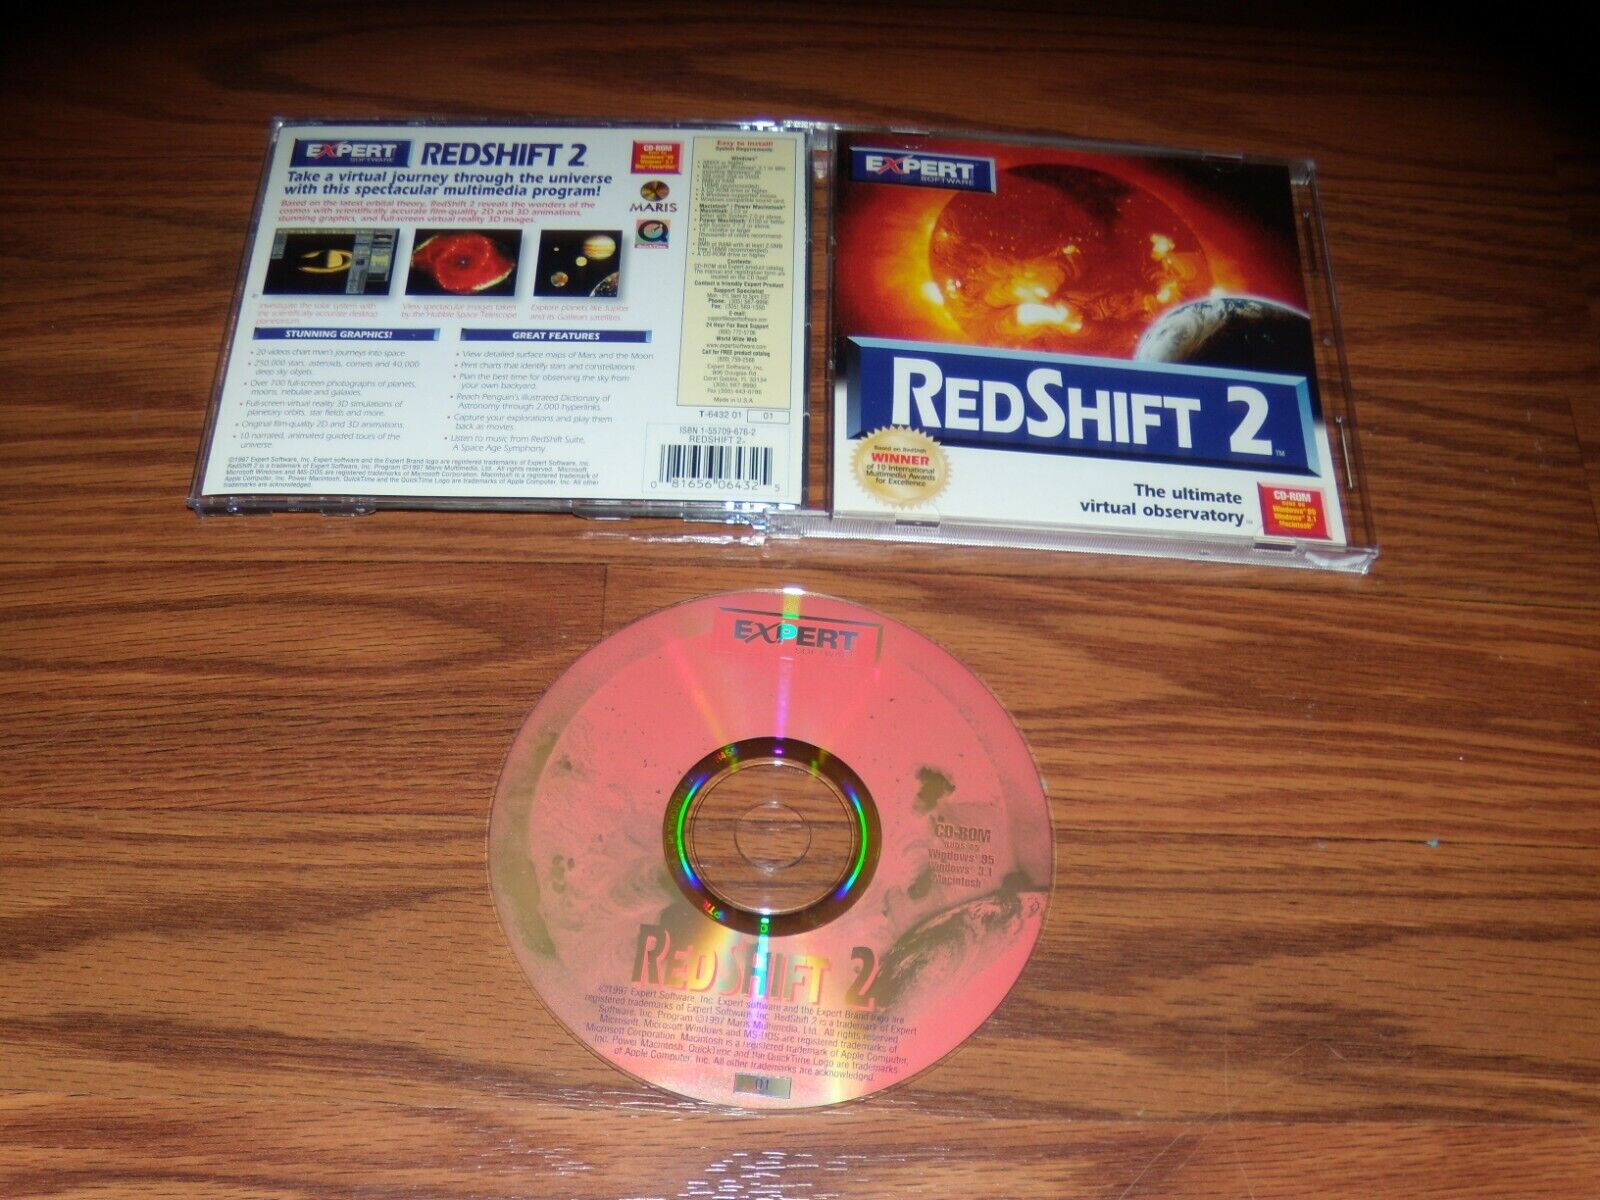 Redshift 2 (PC, 1997) CD-ROM Game